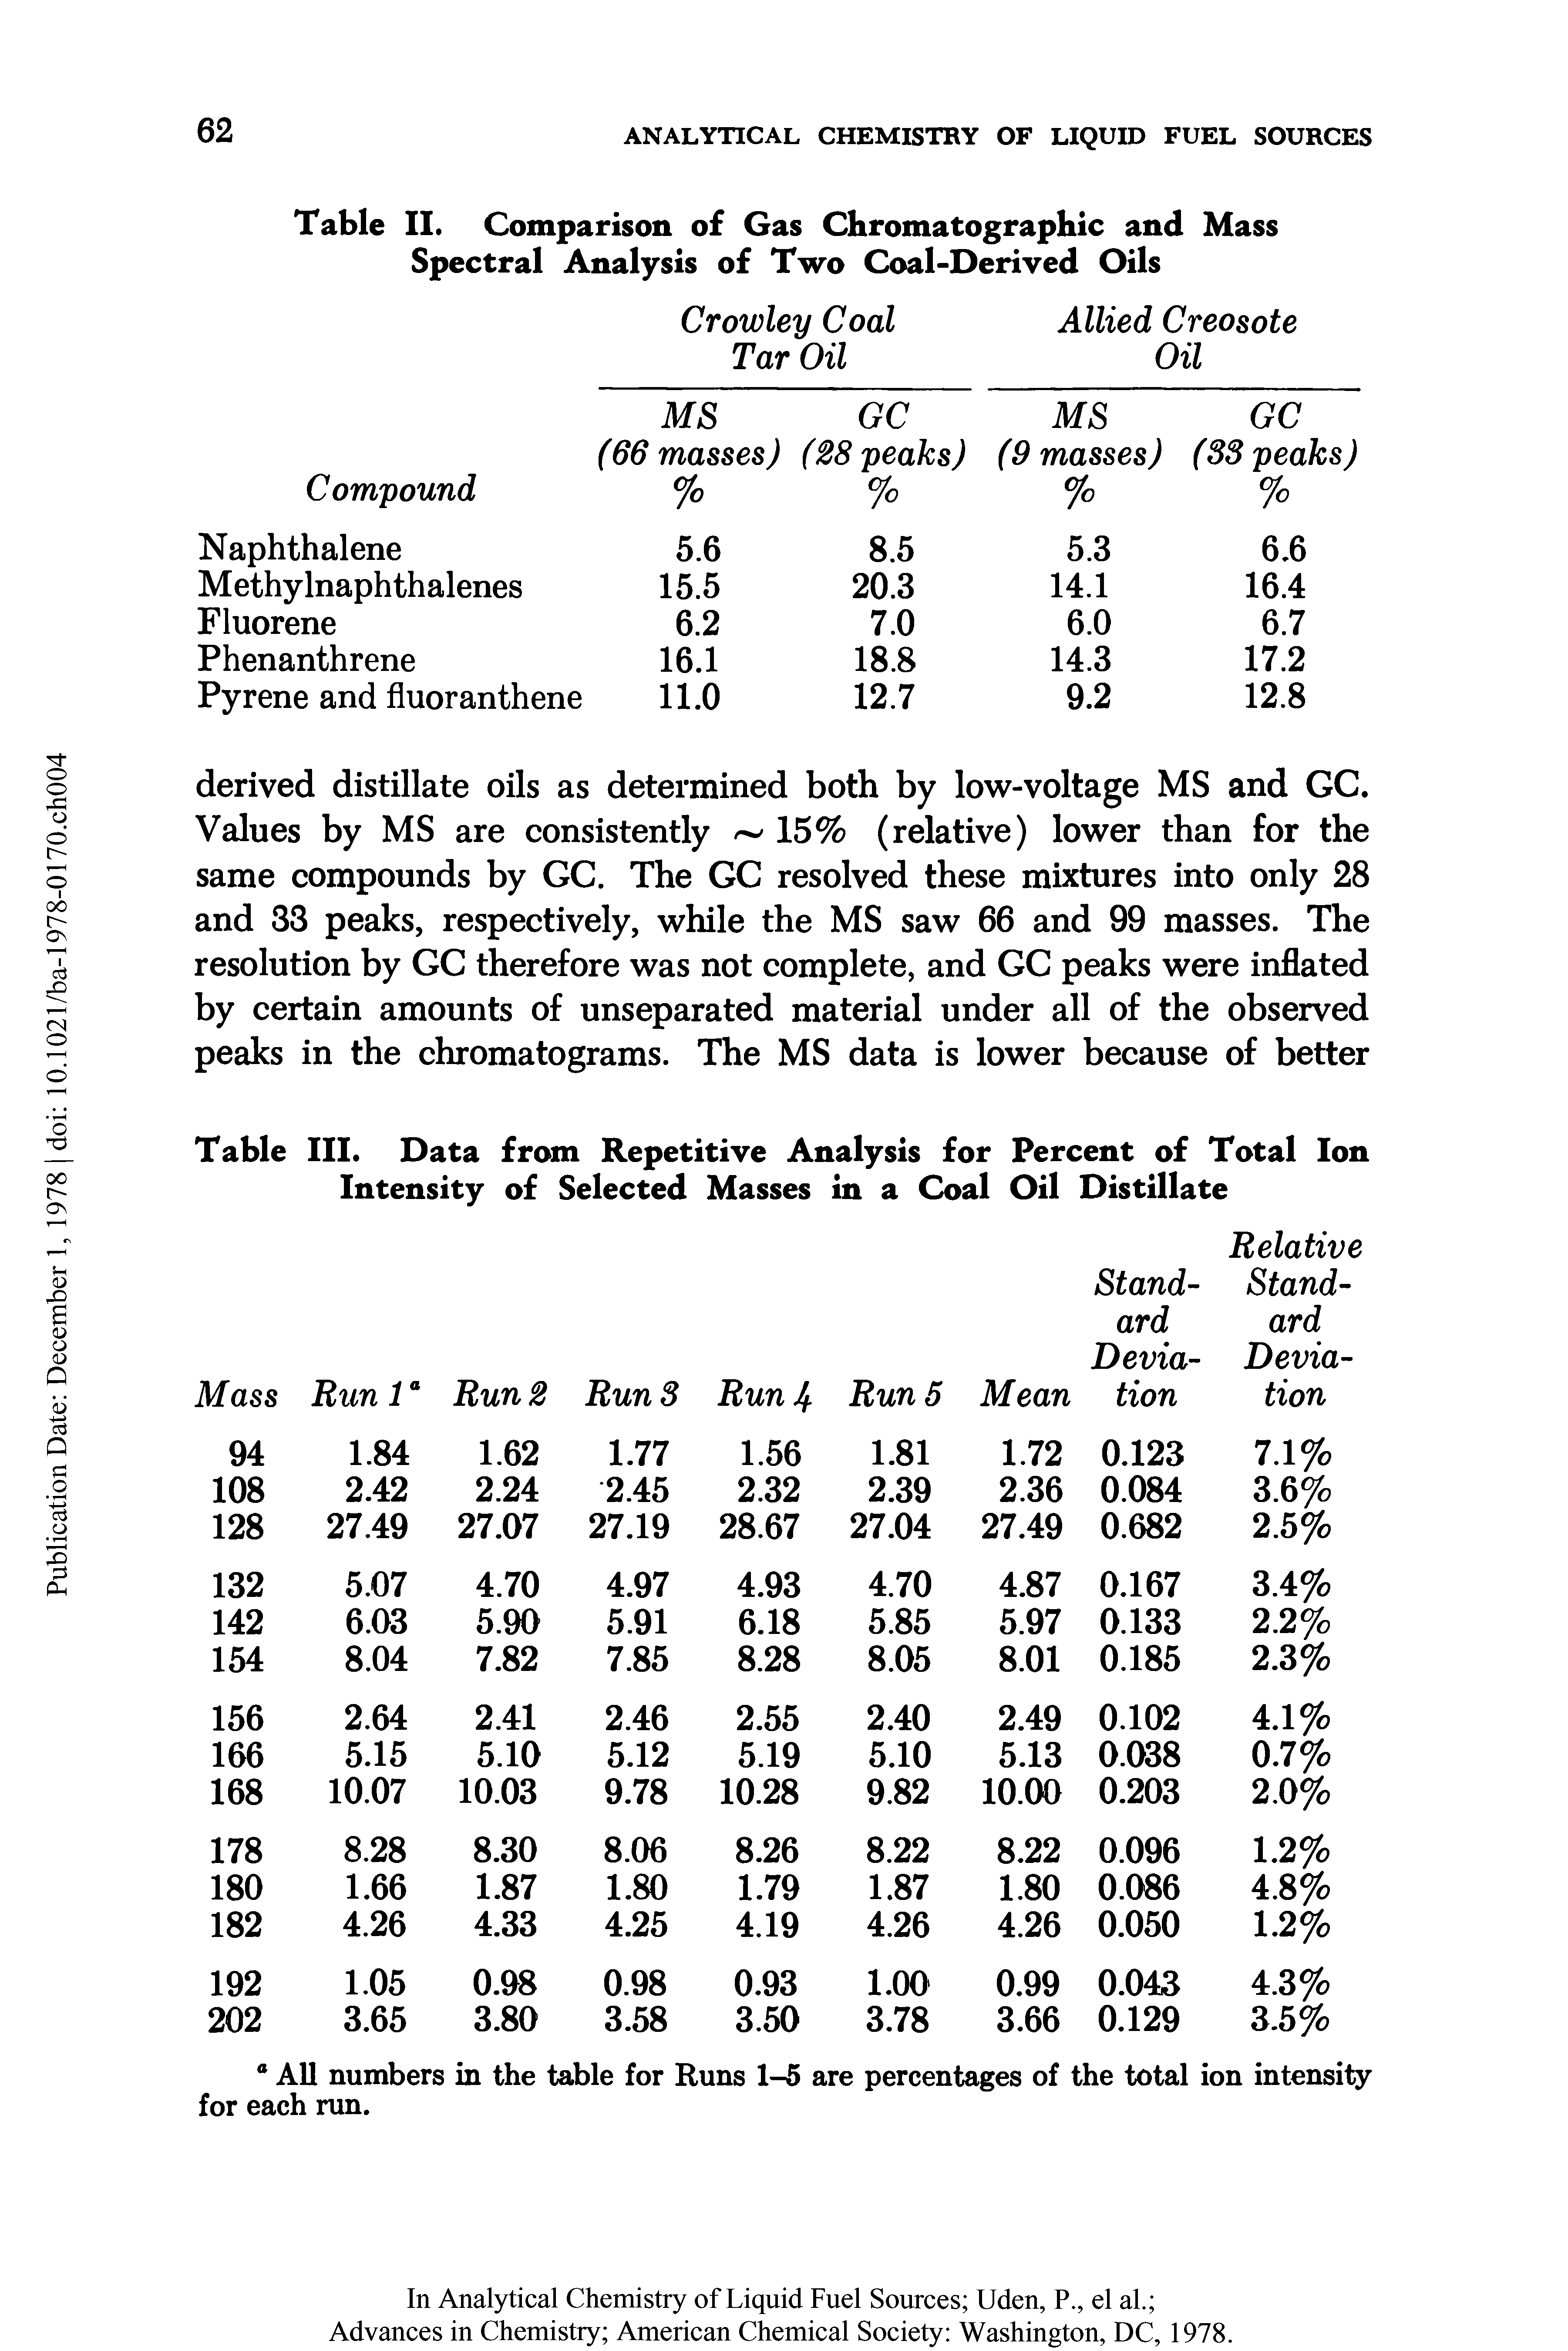 Table III. Data from Repetitive Analysis for Percent of Total Ion Intensity of Selected Masses in a Coal Oil Distillate...